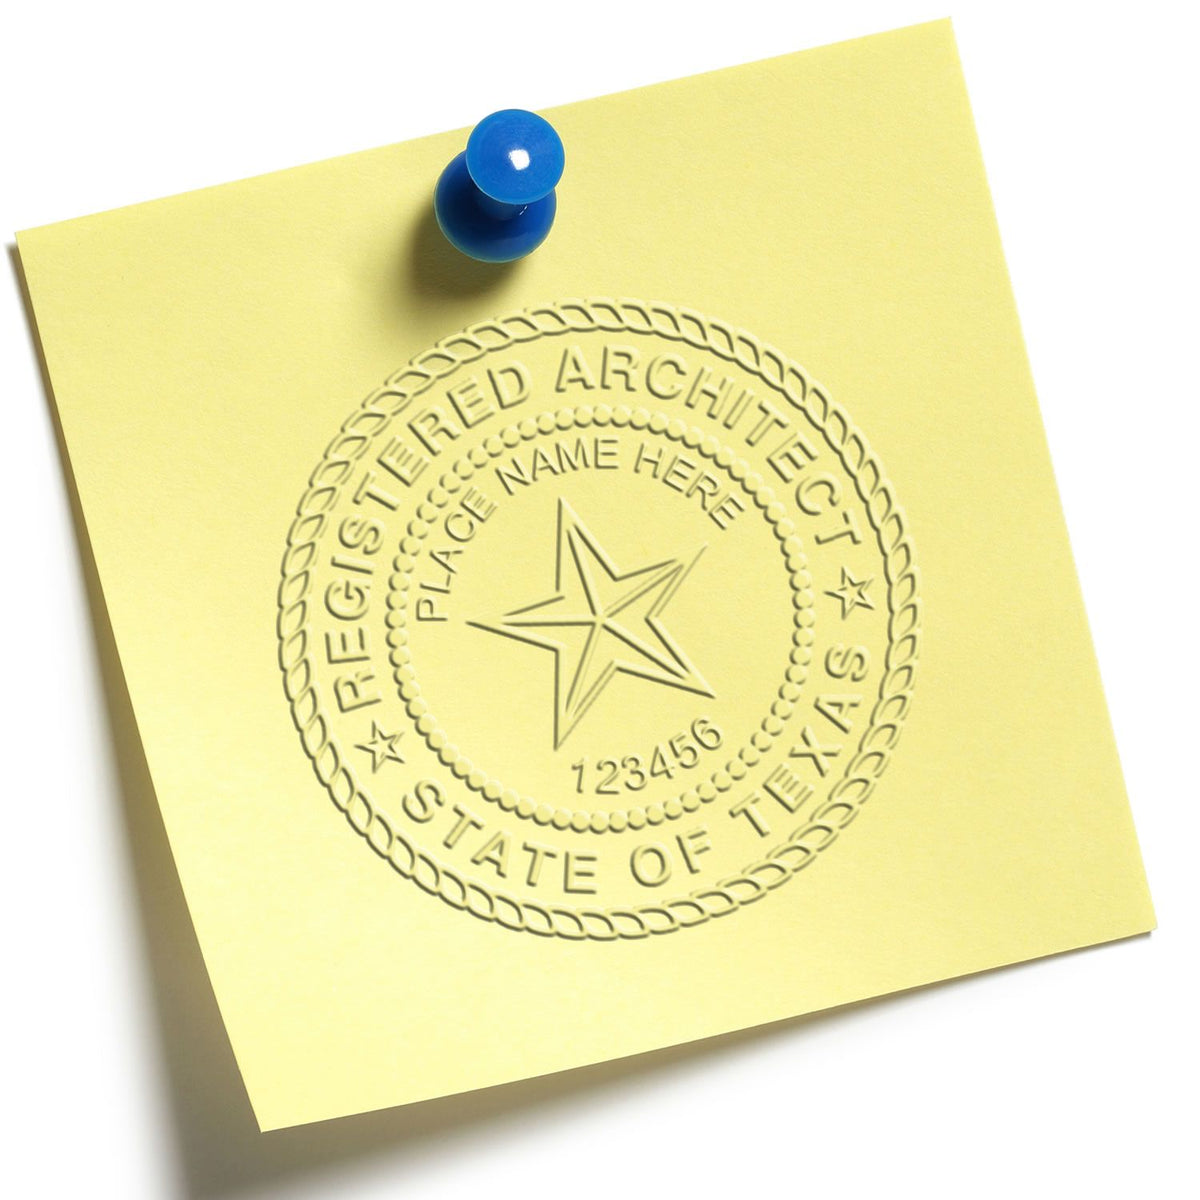 This paper is stamped with a sample imprint of the Handheld Texas Architect Seal Embosser, signifying its quality and reliability.